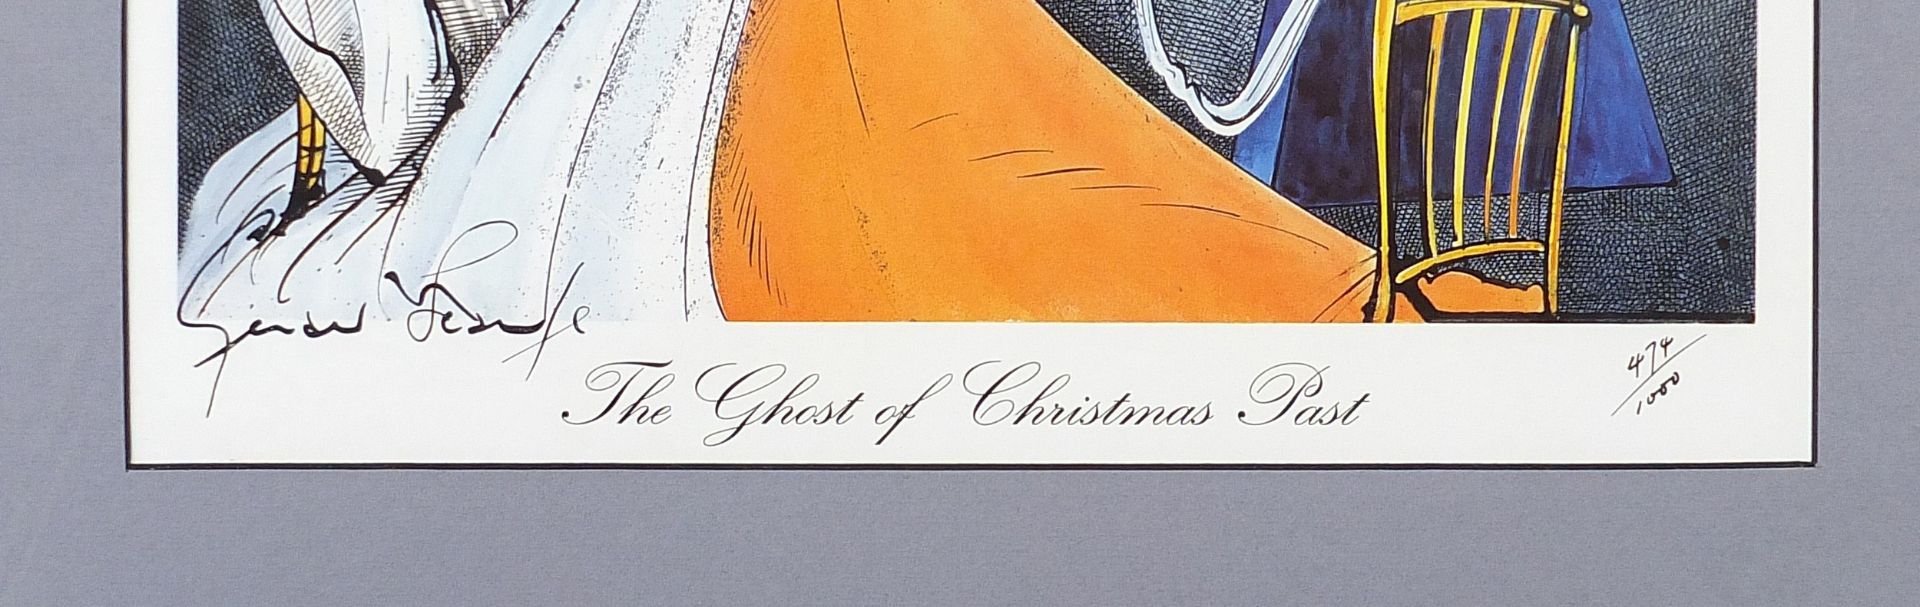 Gerald Scarfe - The Ghost of Christmas Past, coloured print signed in ink, limited edition 474/1000, - Image 3 of 4